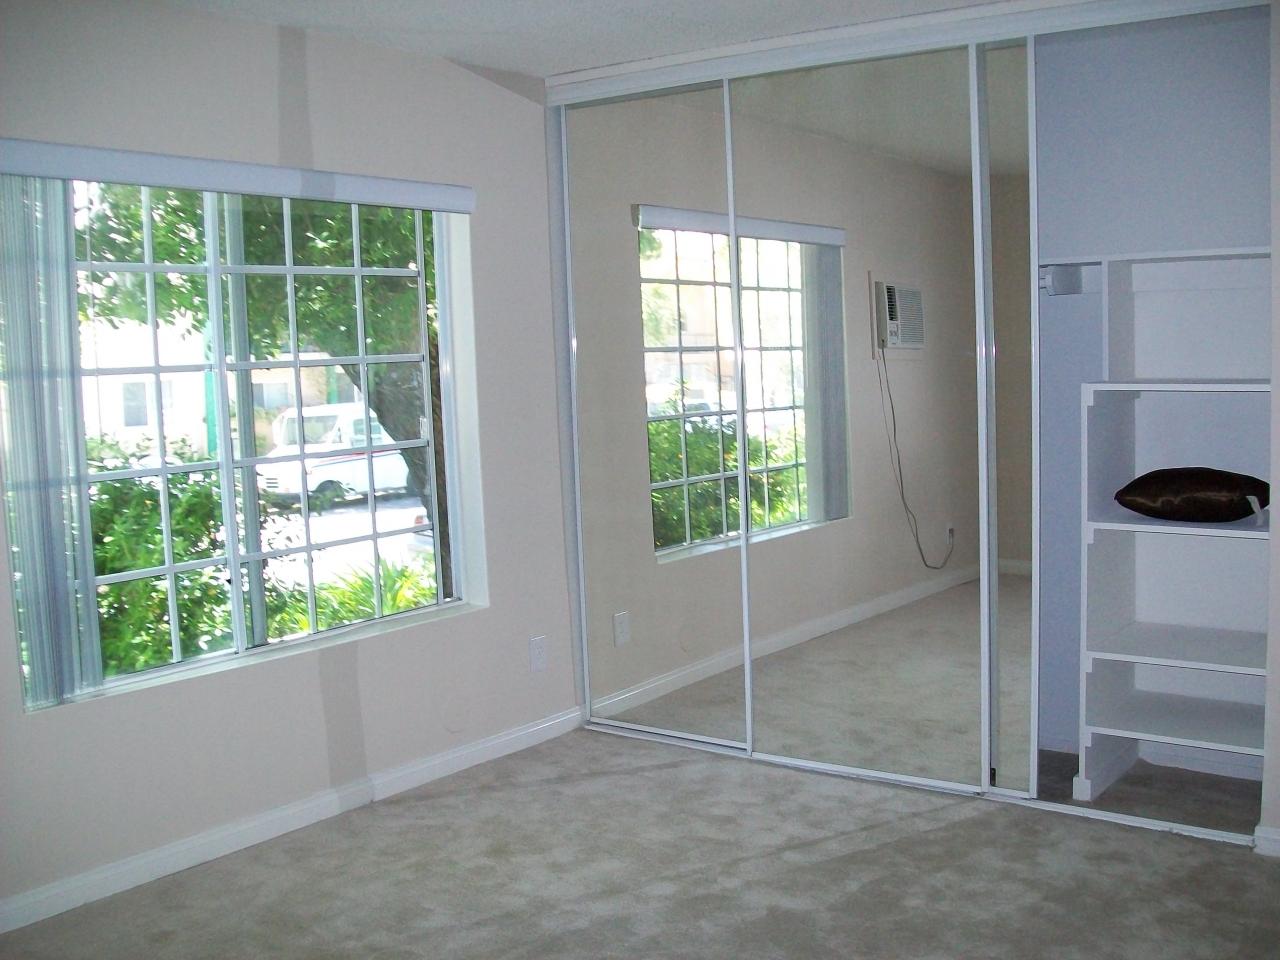 Photo of Kingsbury Villas Apartments - a view of apartment interior with mirror doors and window